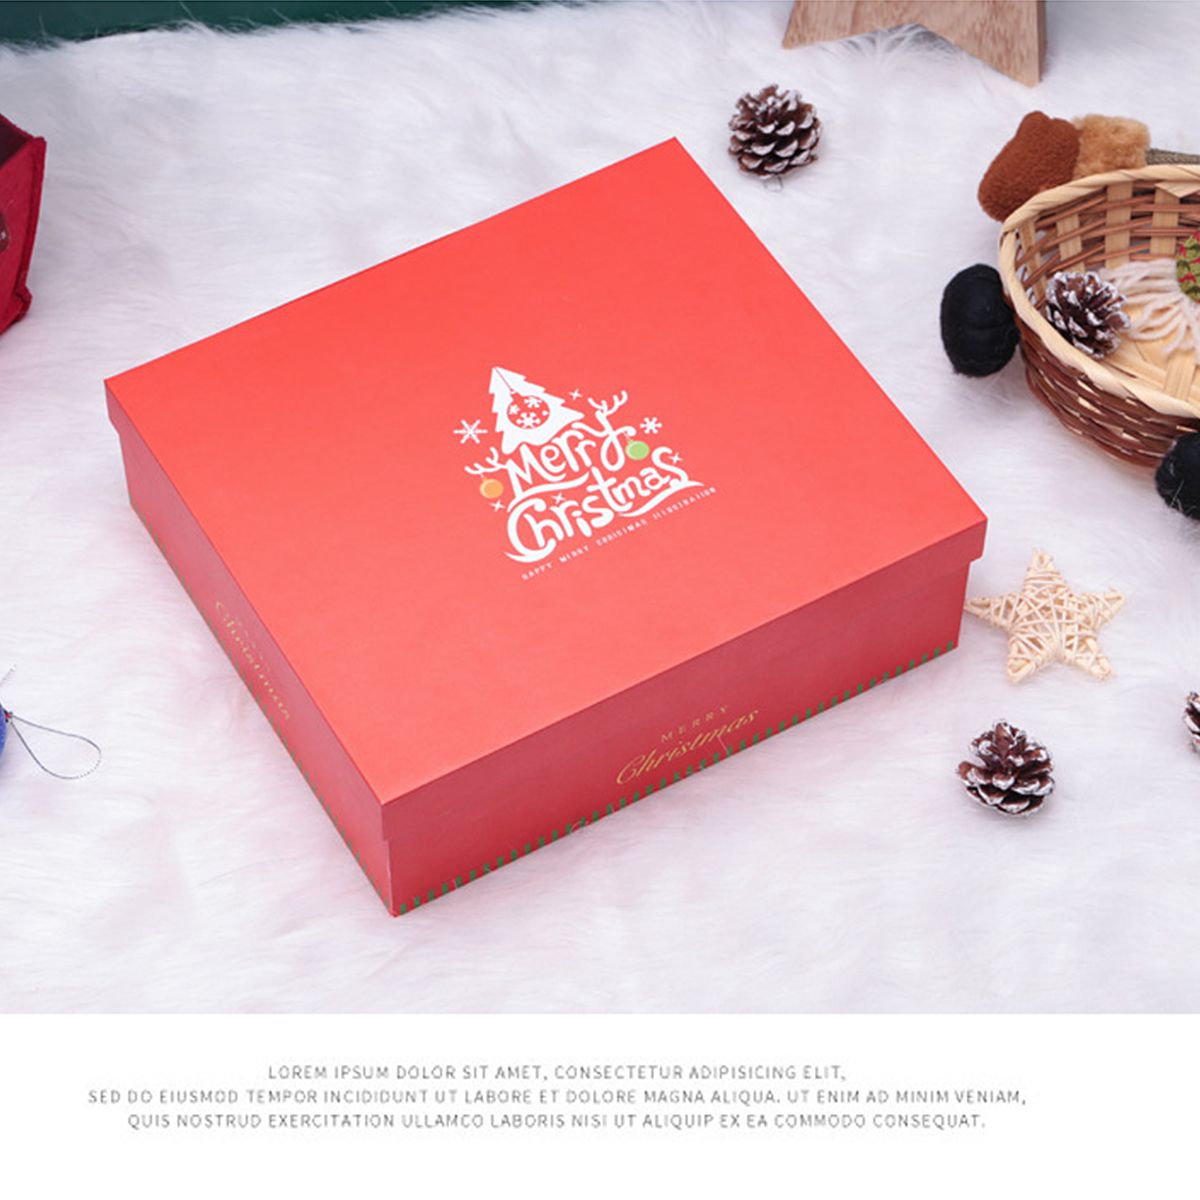 3227511cm-Christmas-Eve-Decorations-Gift-Box-Stereo-Pattern-Inside-With-Bag-Hard-Paper-1596606